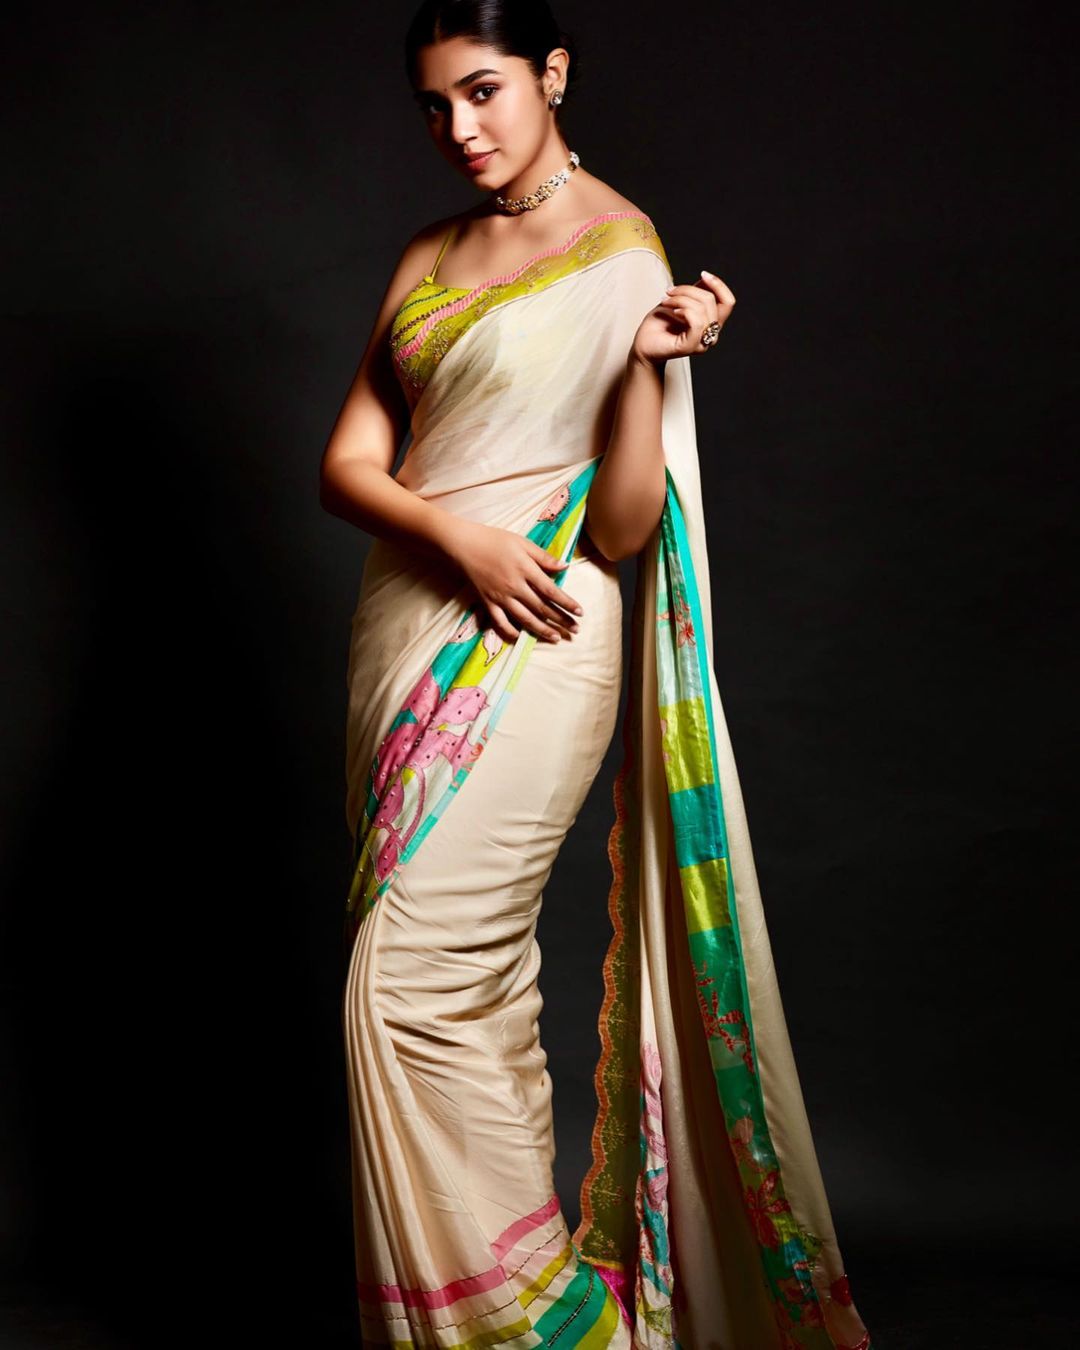 Krithi Look Classy In Off White Saree Outfit Krithi Shetty Setting Some Major Traditional and Ethnic Outfit Look Inspo